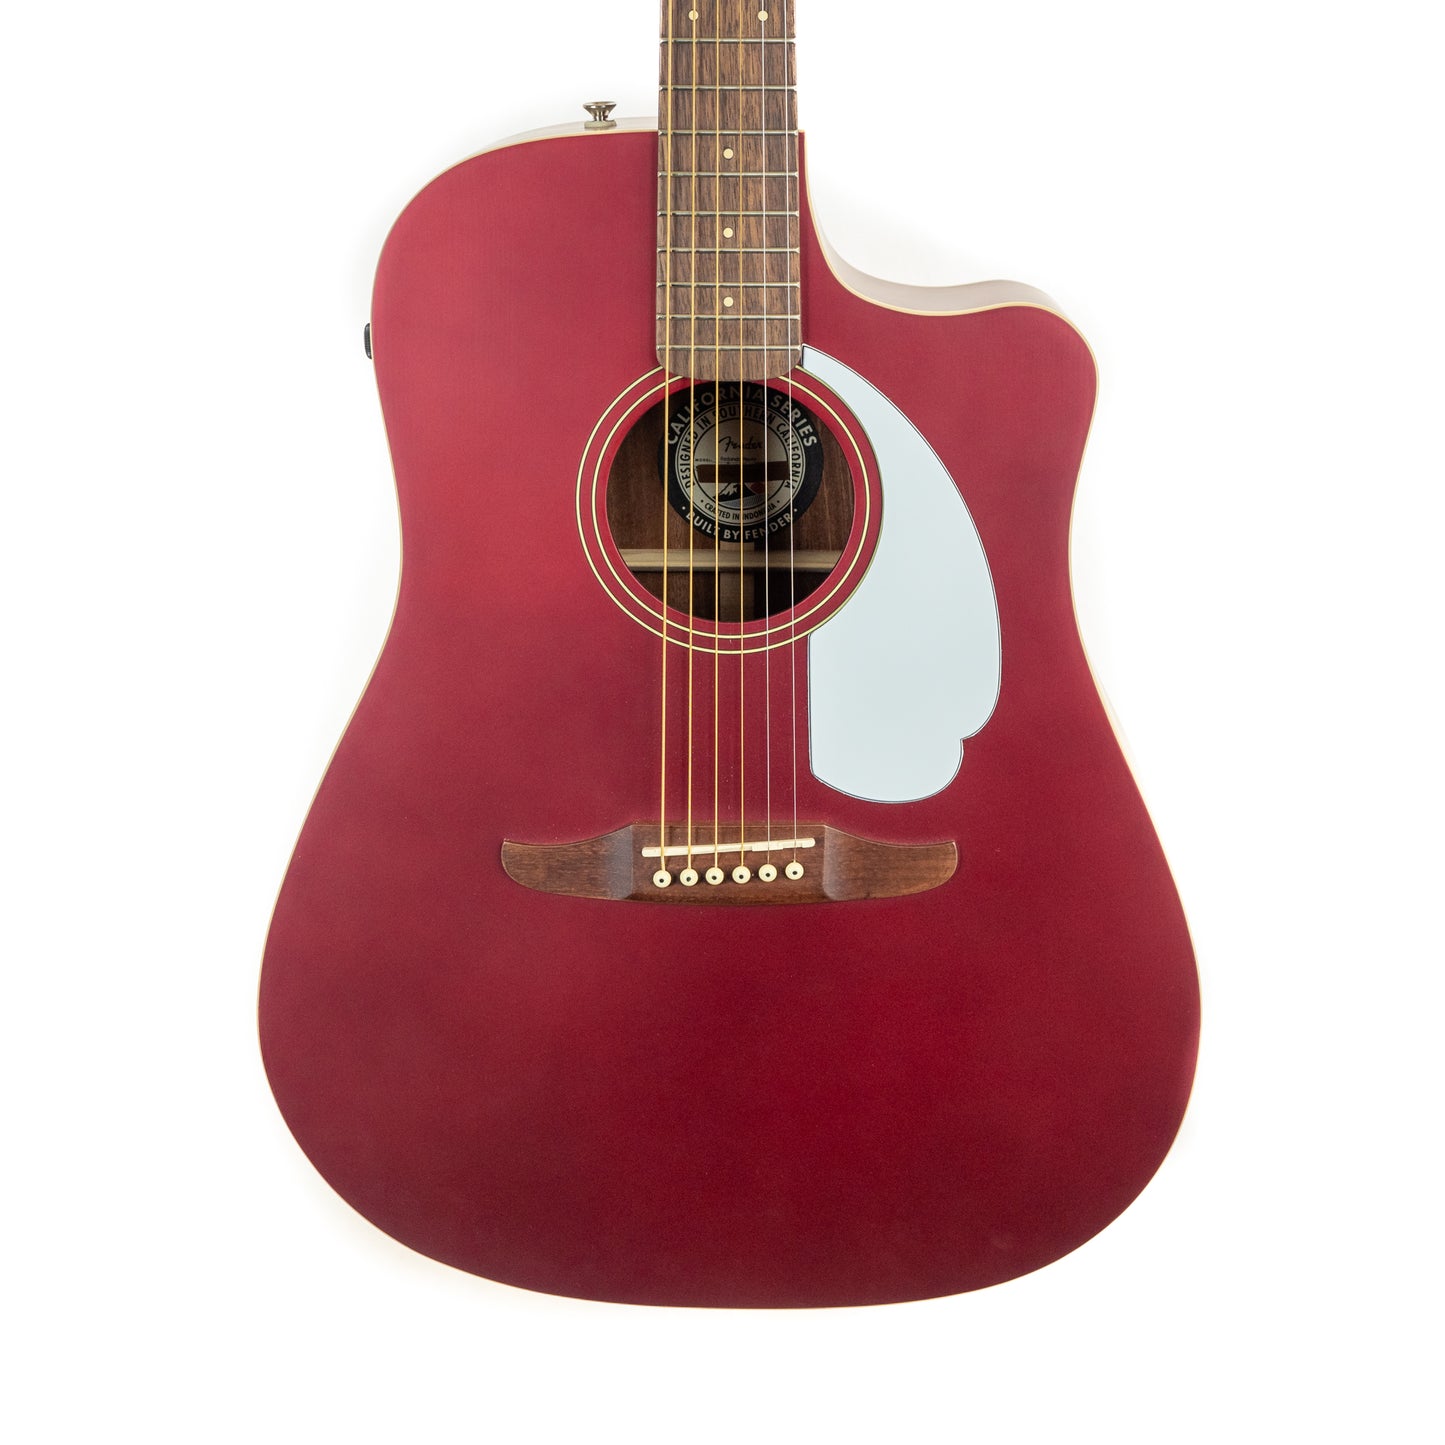 Fender Redondo Player, candy apple red satin cutaway electric dreadnought guitar